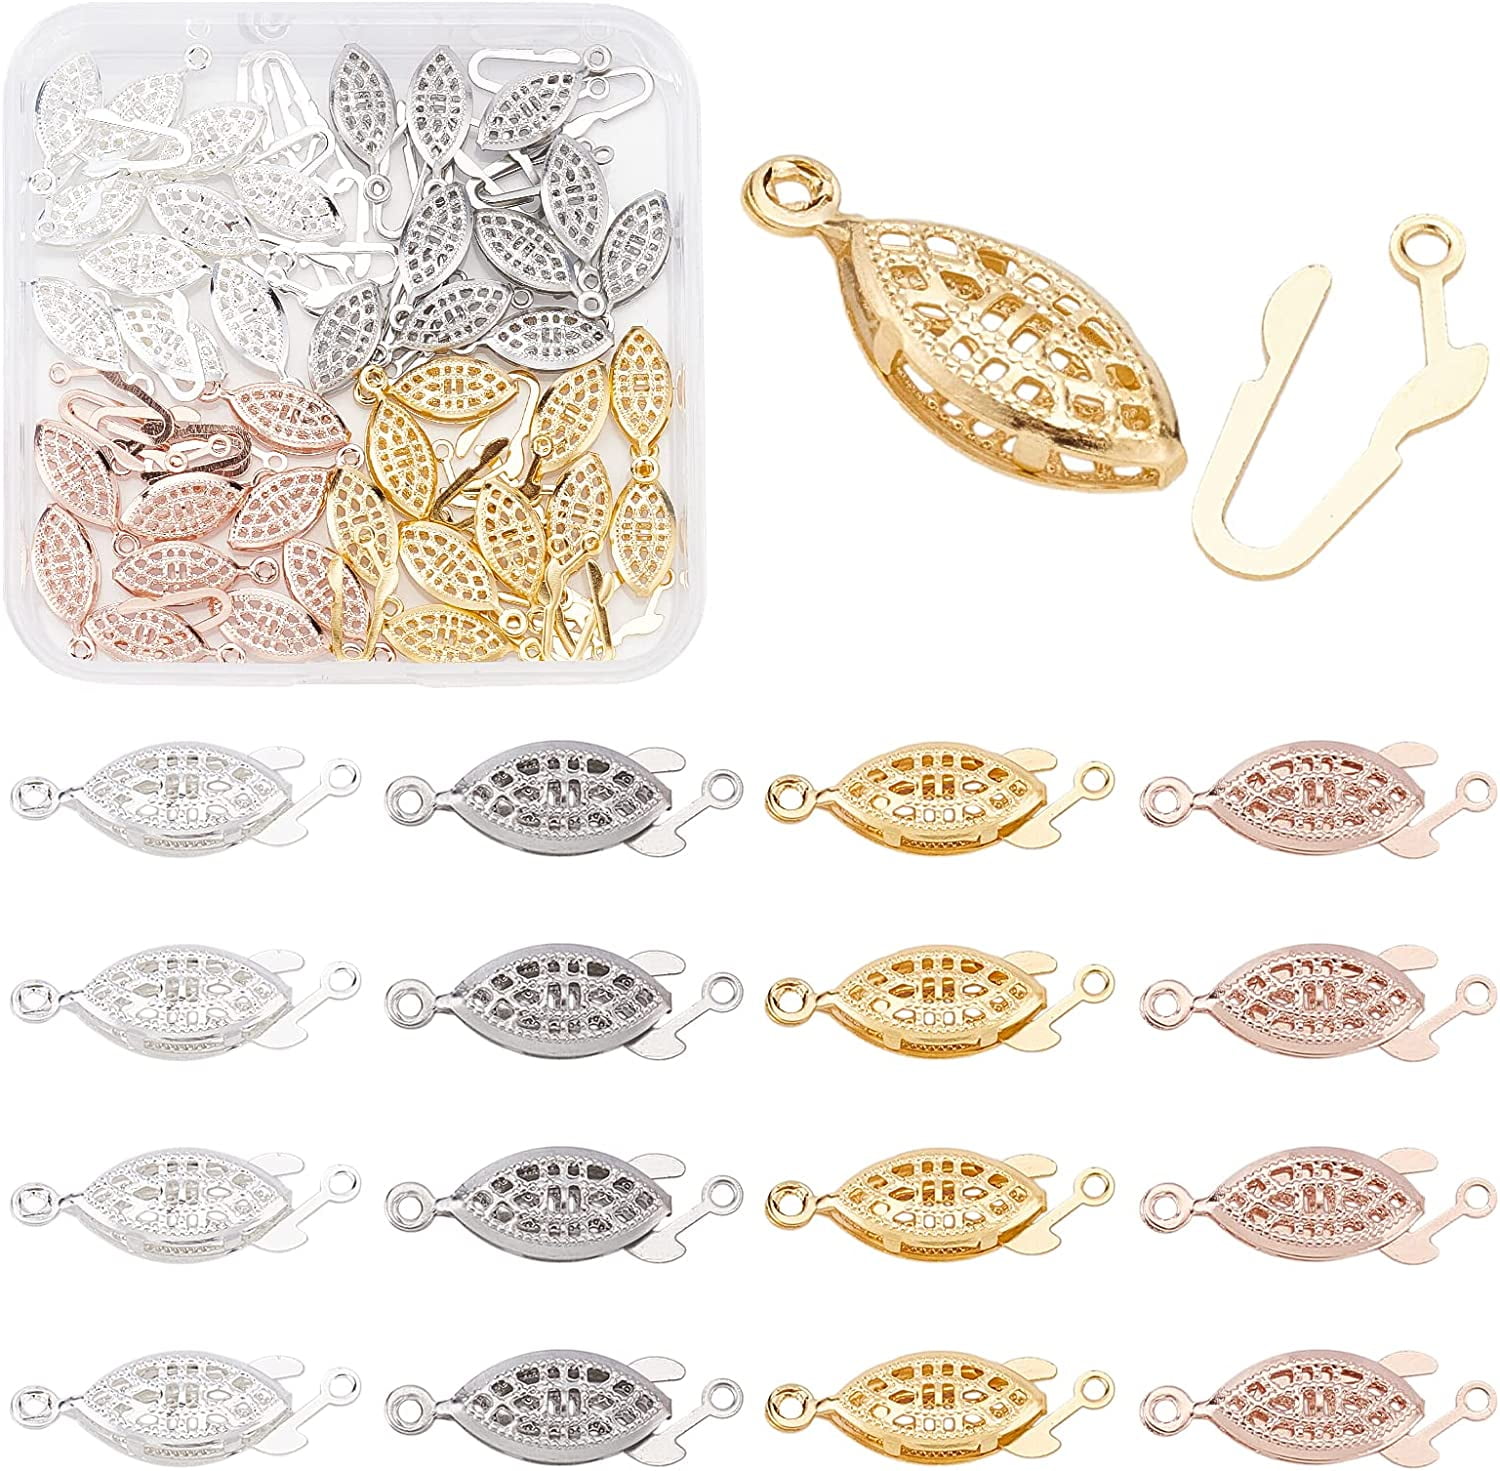 40 Sets Filigree Clasp 4 Color Oval Box Clasps Jewelry Slide Clasp Necklace  Bracelet Connectors Filigree Fish Hook Clasp for Pearl Knotted Jewelry  Making Craft Necklace Bracelet 